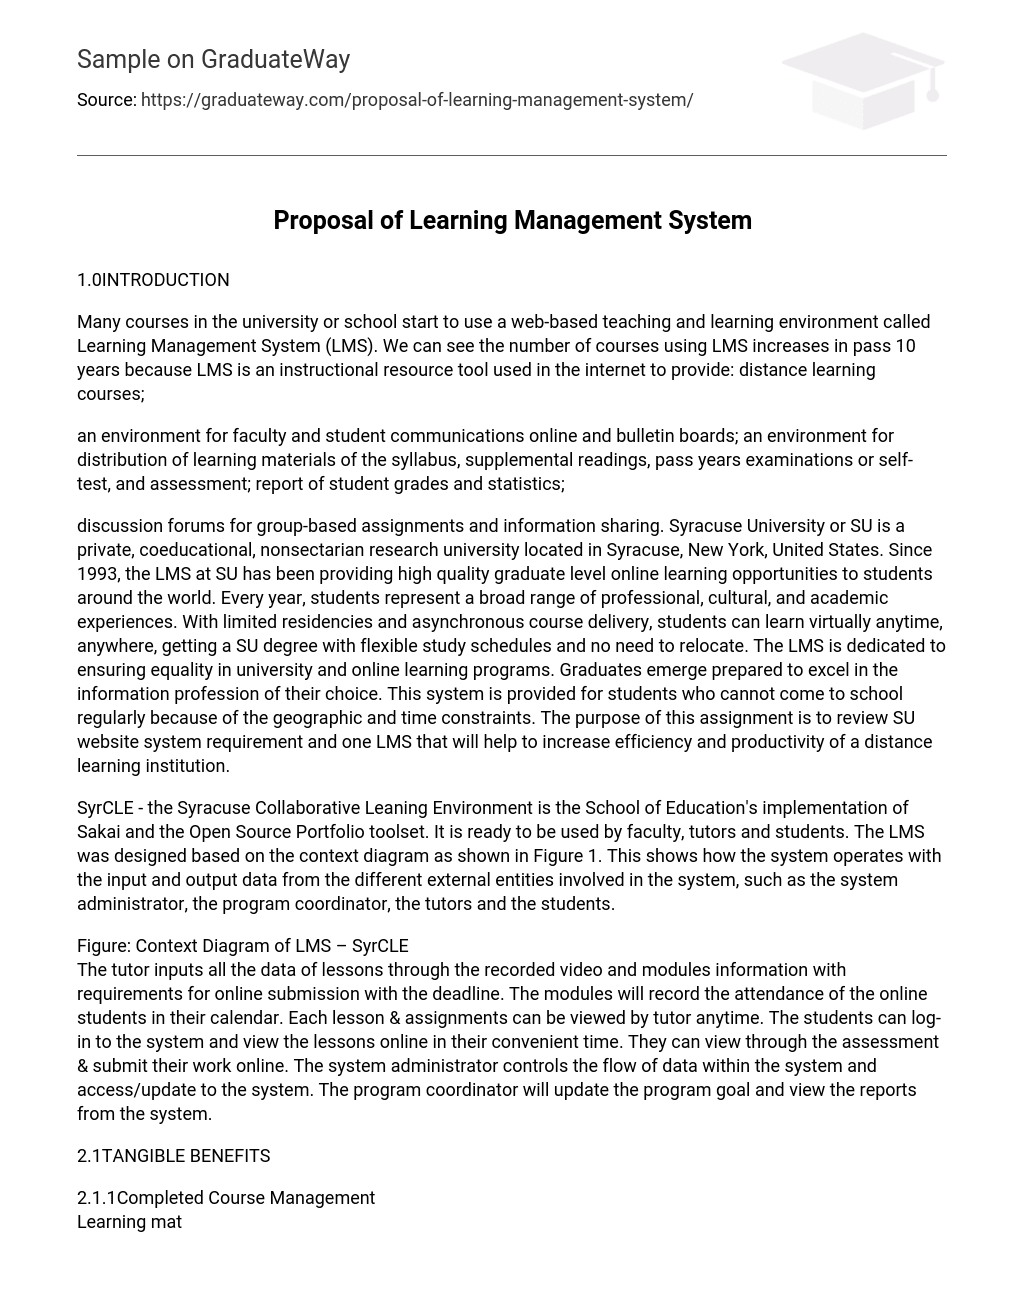 Proposal of Learning Management System